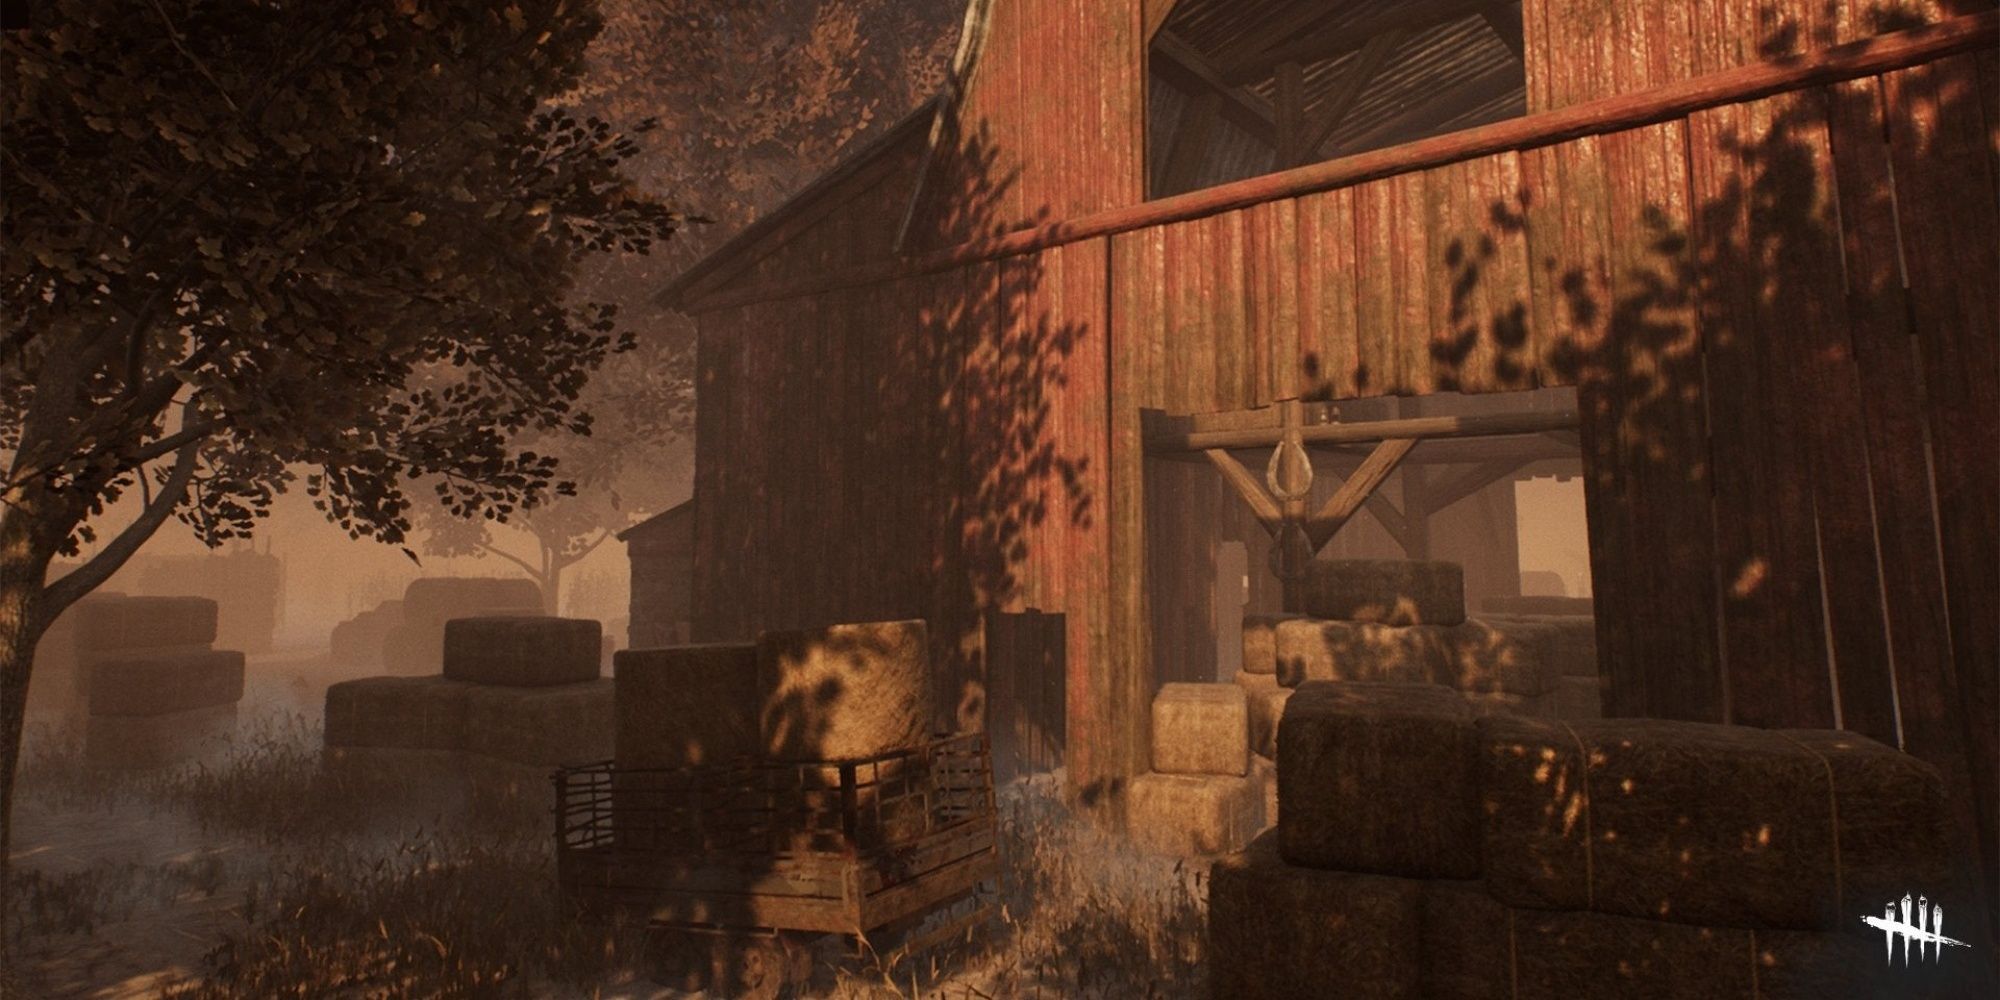 Outside the barn on Fractured Cowshed in Dead by Daylight